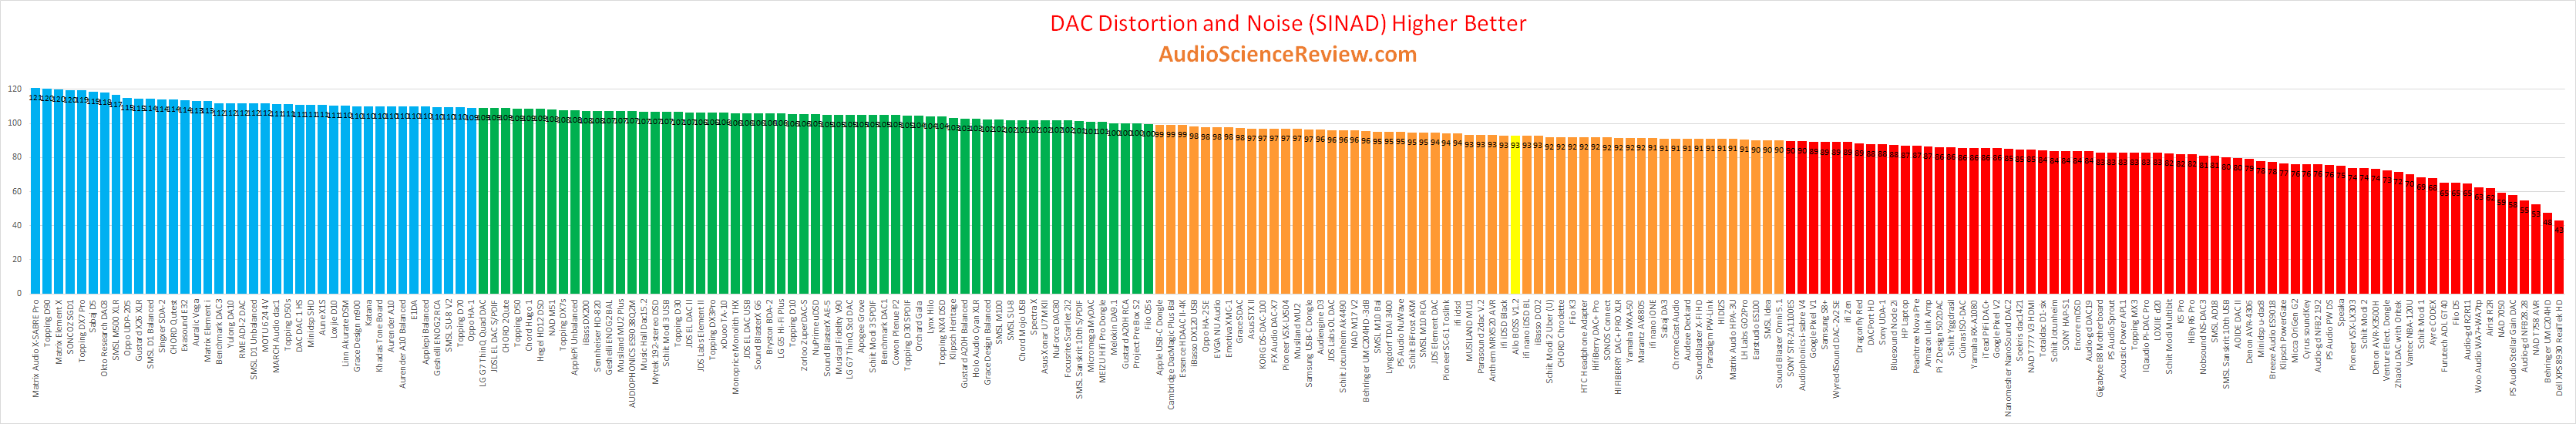 Best Audio DAC 2020 Review.png